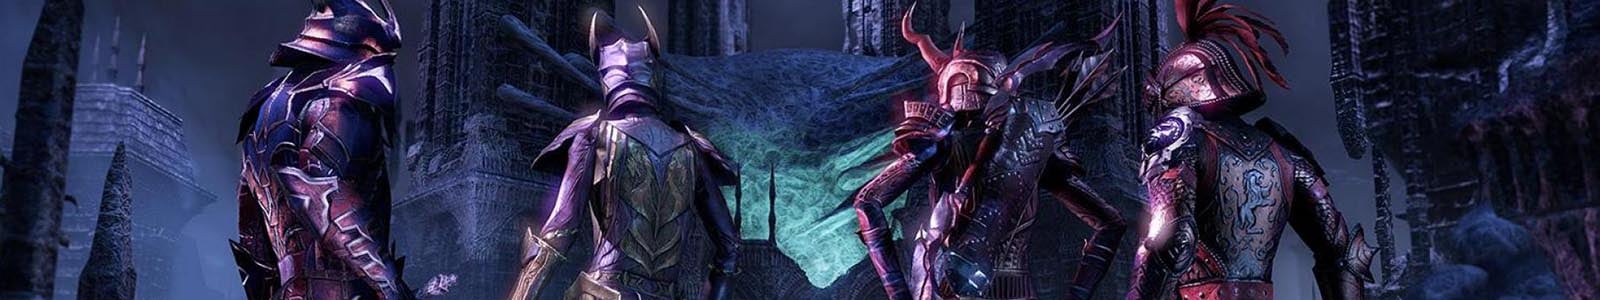 How to join the Fighters Guild in ESO header